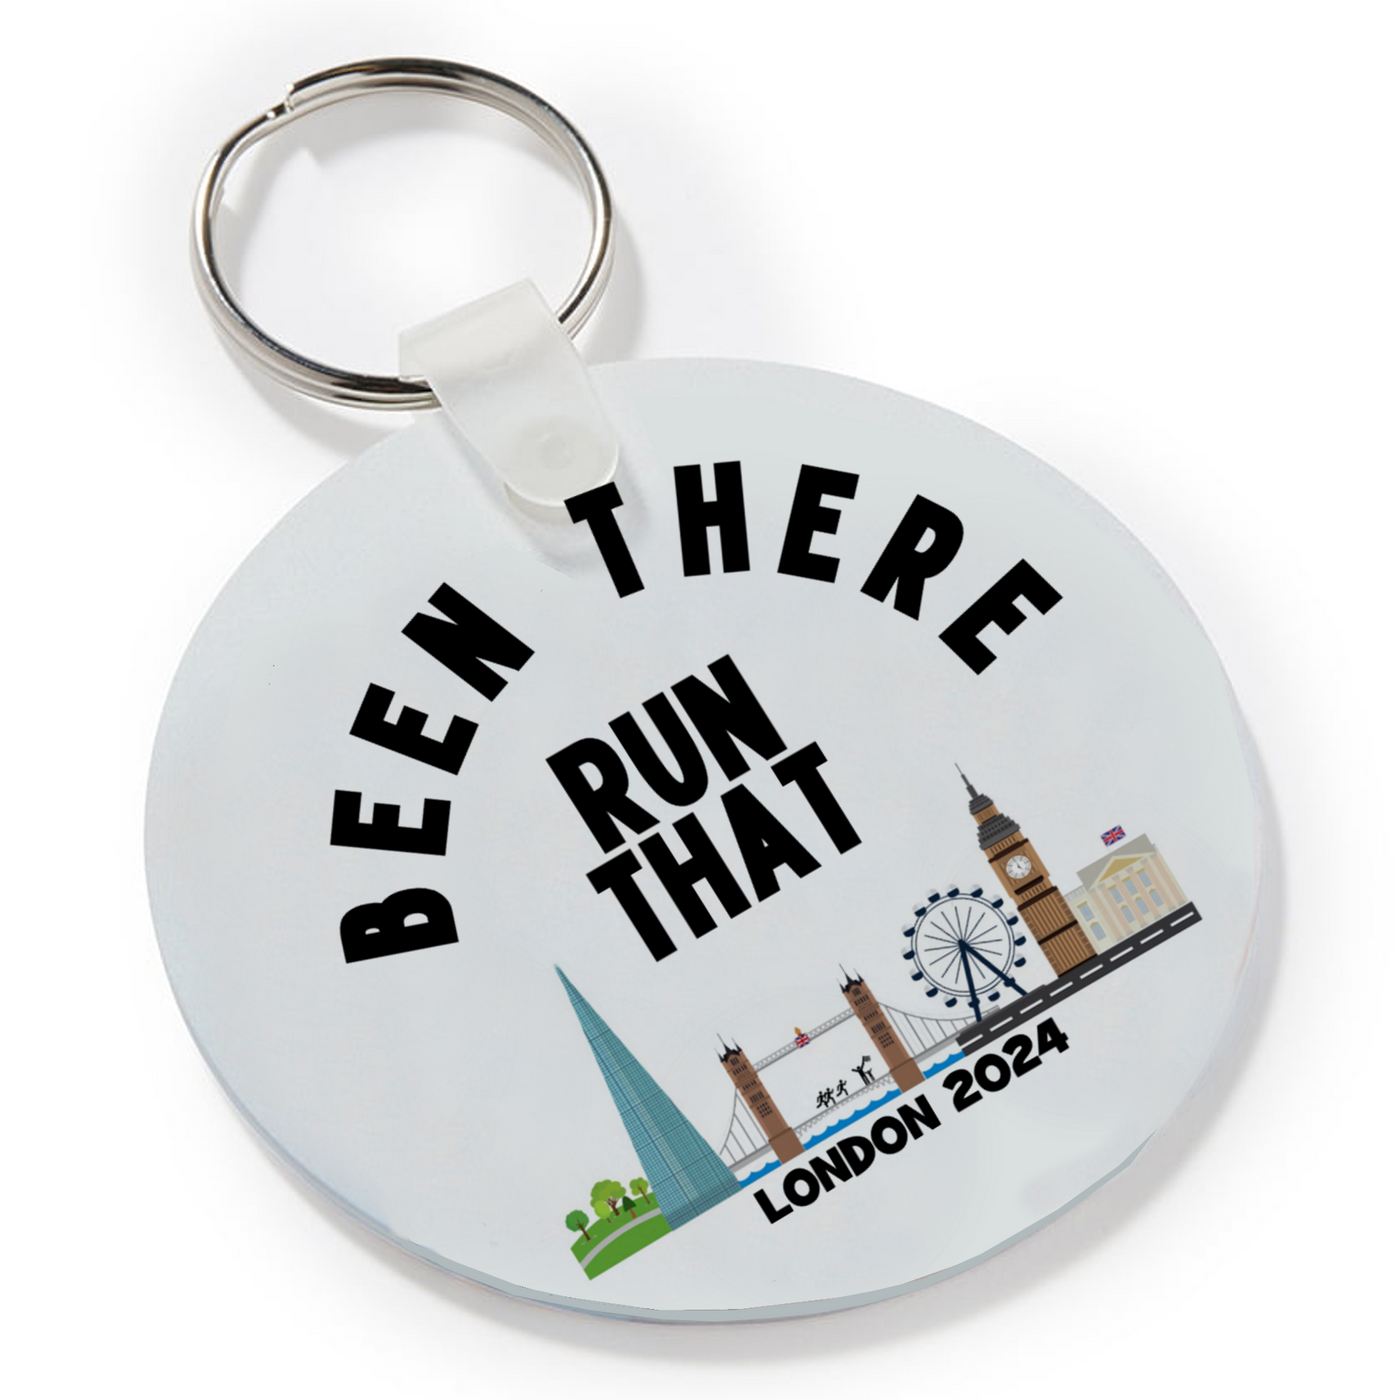 Been There Run That - Keyring in 2 styles!